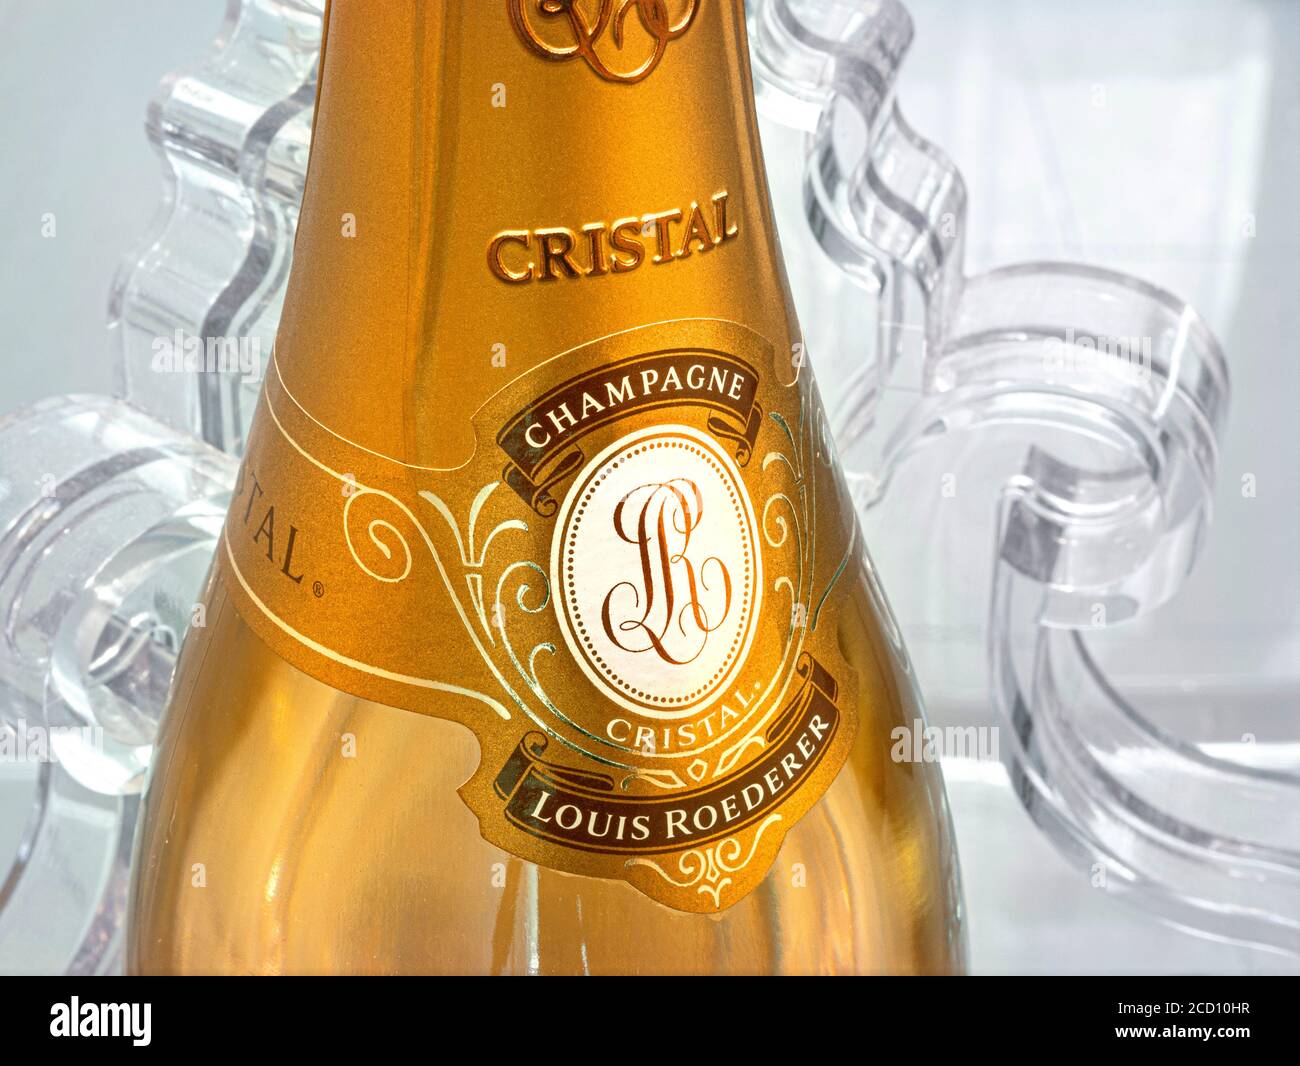 CRISTAL CHAMPAGNE LABEL NECK Bottle of Louis Roederer Cristal fine champagne in luxury fine dining situation Stock Photo